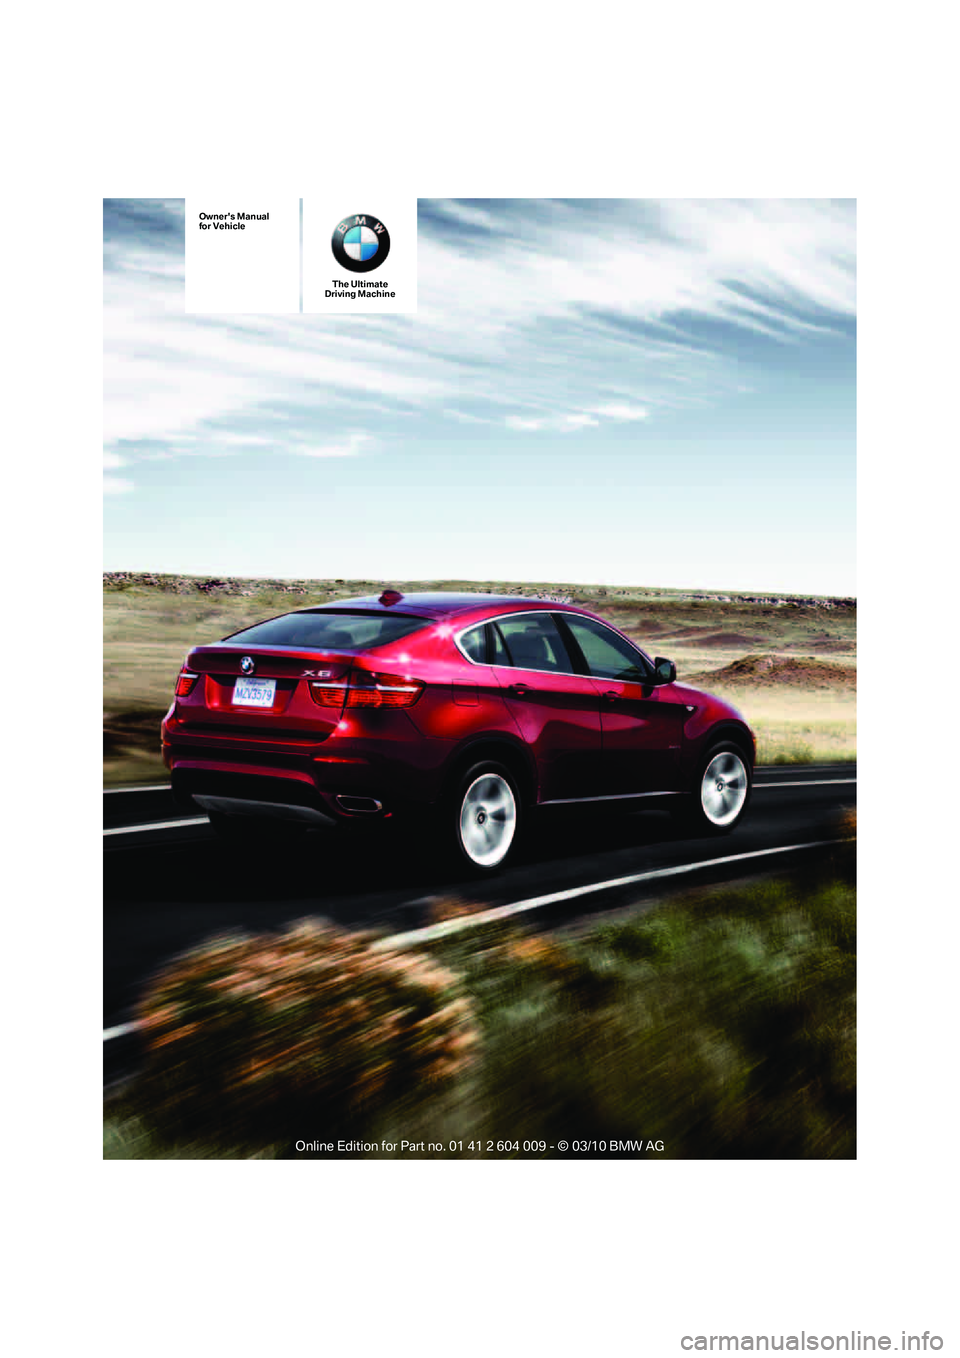 BMW X5 XDRIVE 35I PREMIUM 2011  Owners Manual The Ultimate
Driving Machine
Owners Manual
for Vehicle 